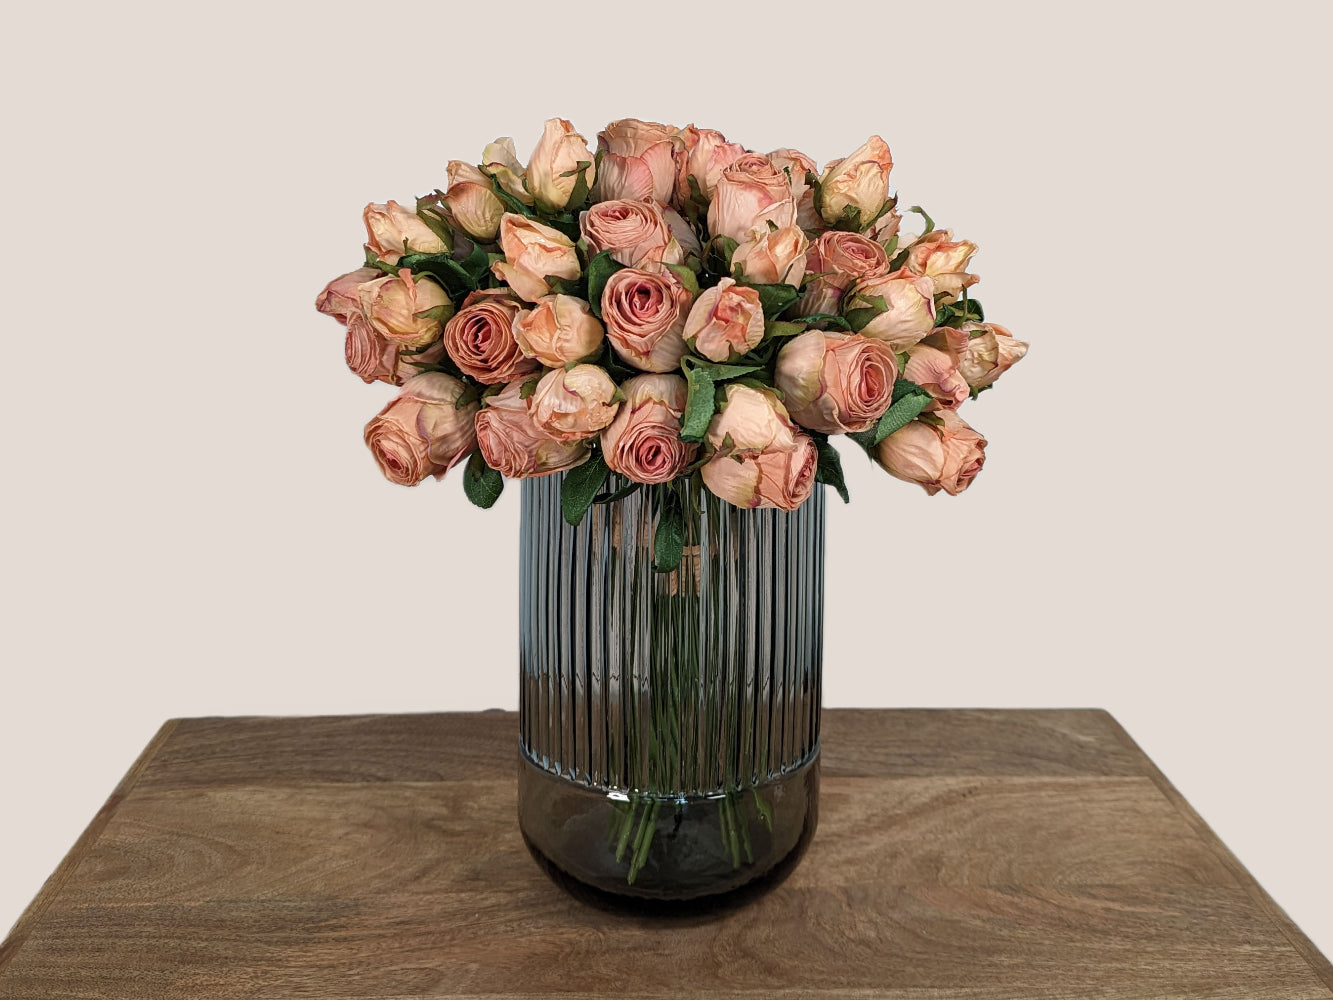 An image of a bouquet of blush pink artificial roses crafted to look like preserved roses. The roses have a pink color with light brown edging to give the appearance of being dried. Each stem is 14 inches tall and features two lifelike flower heads with green leaves. The bouquet is showcased against a neutral beige background and displayed in a smokey gray fluted vase, creating a beautiful and realistic centerpiece for any room.